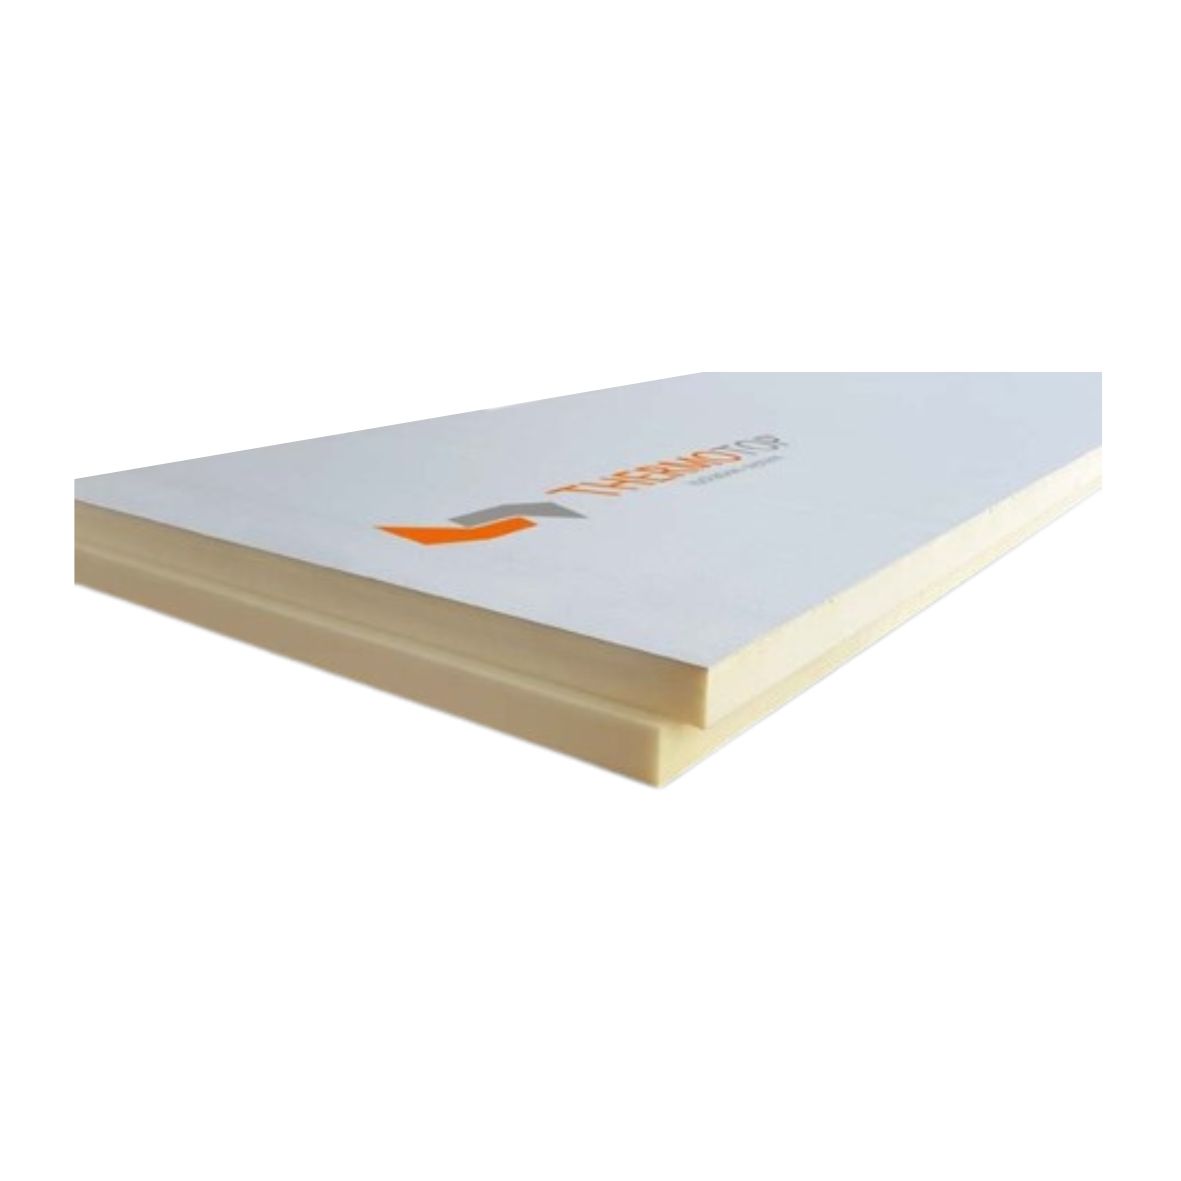 PIR Thermal insulation boards - Thermotop Toboard PIR BV-BV thermal insulation board 50 x 120 x 2400 mm, https:maxbau.ro